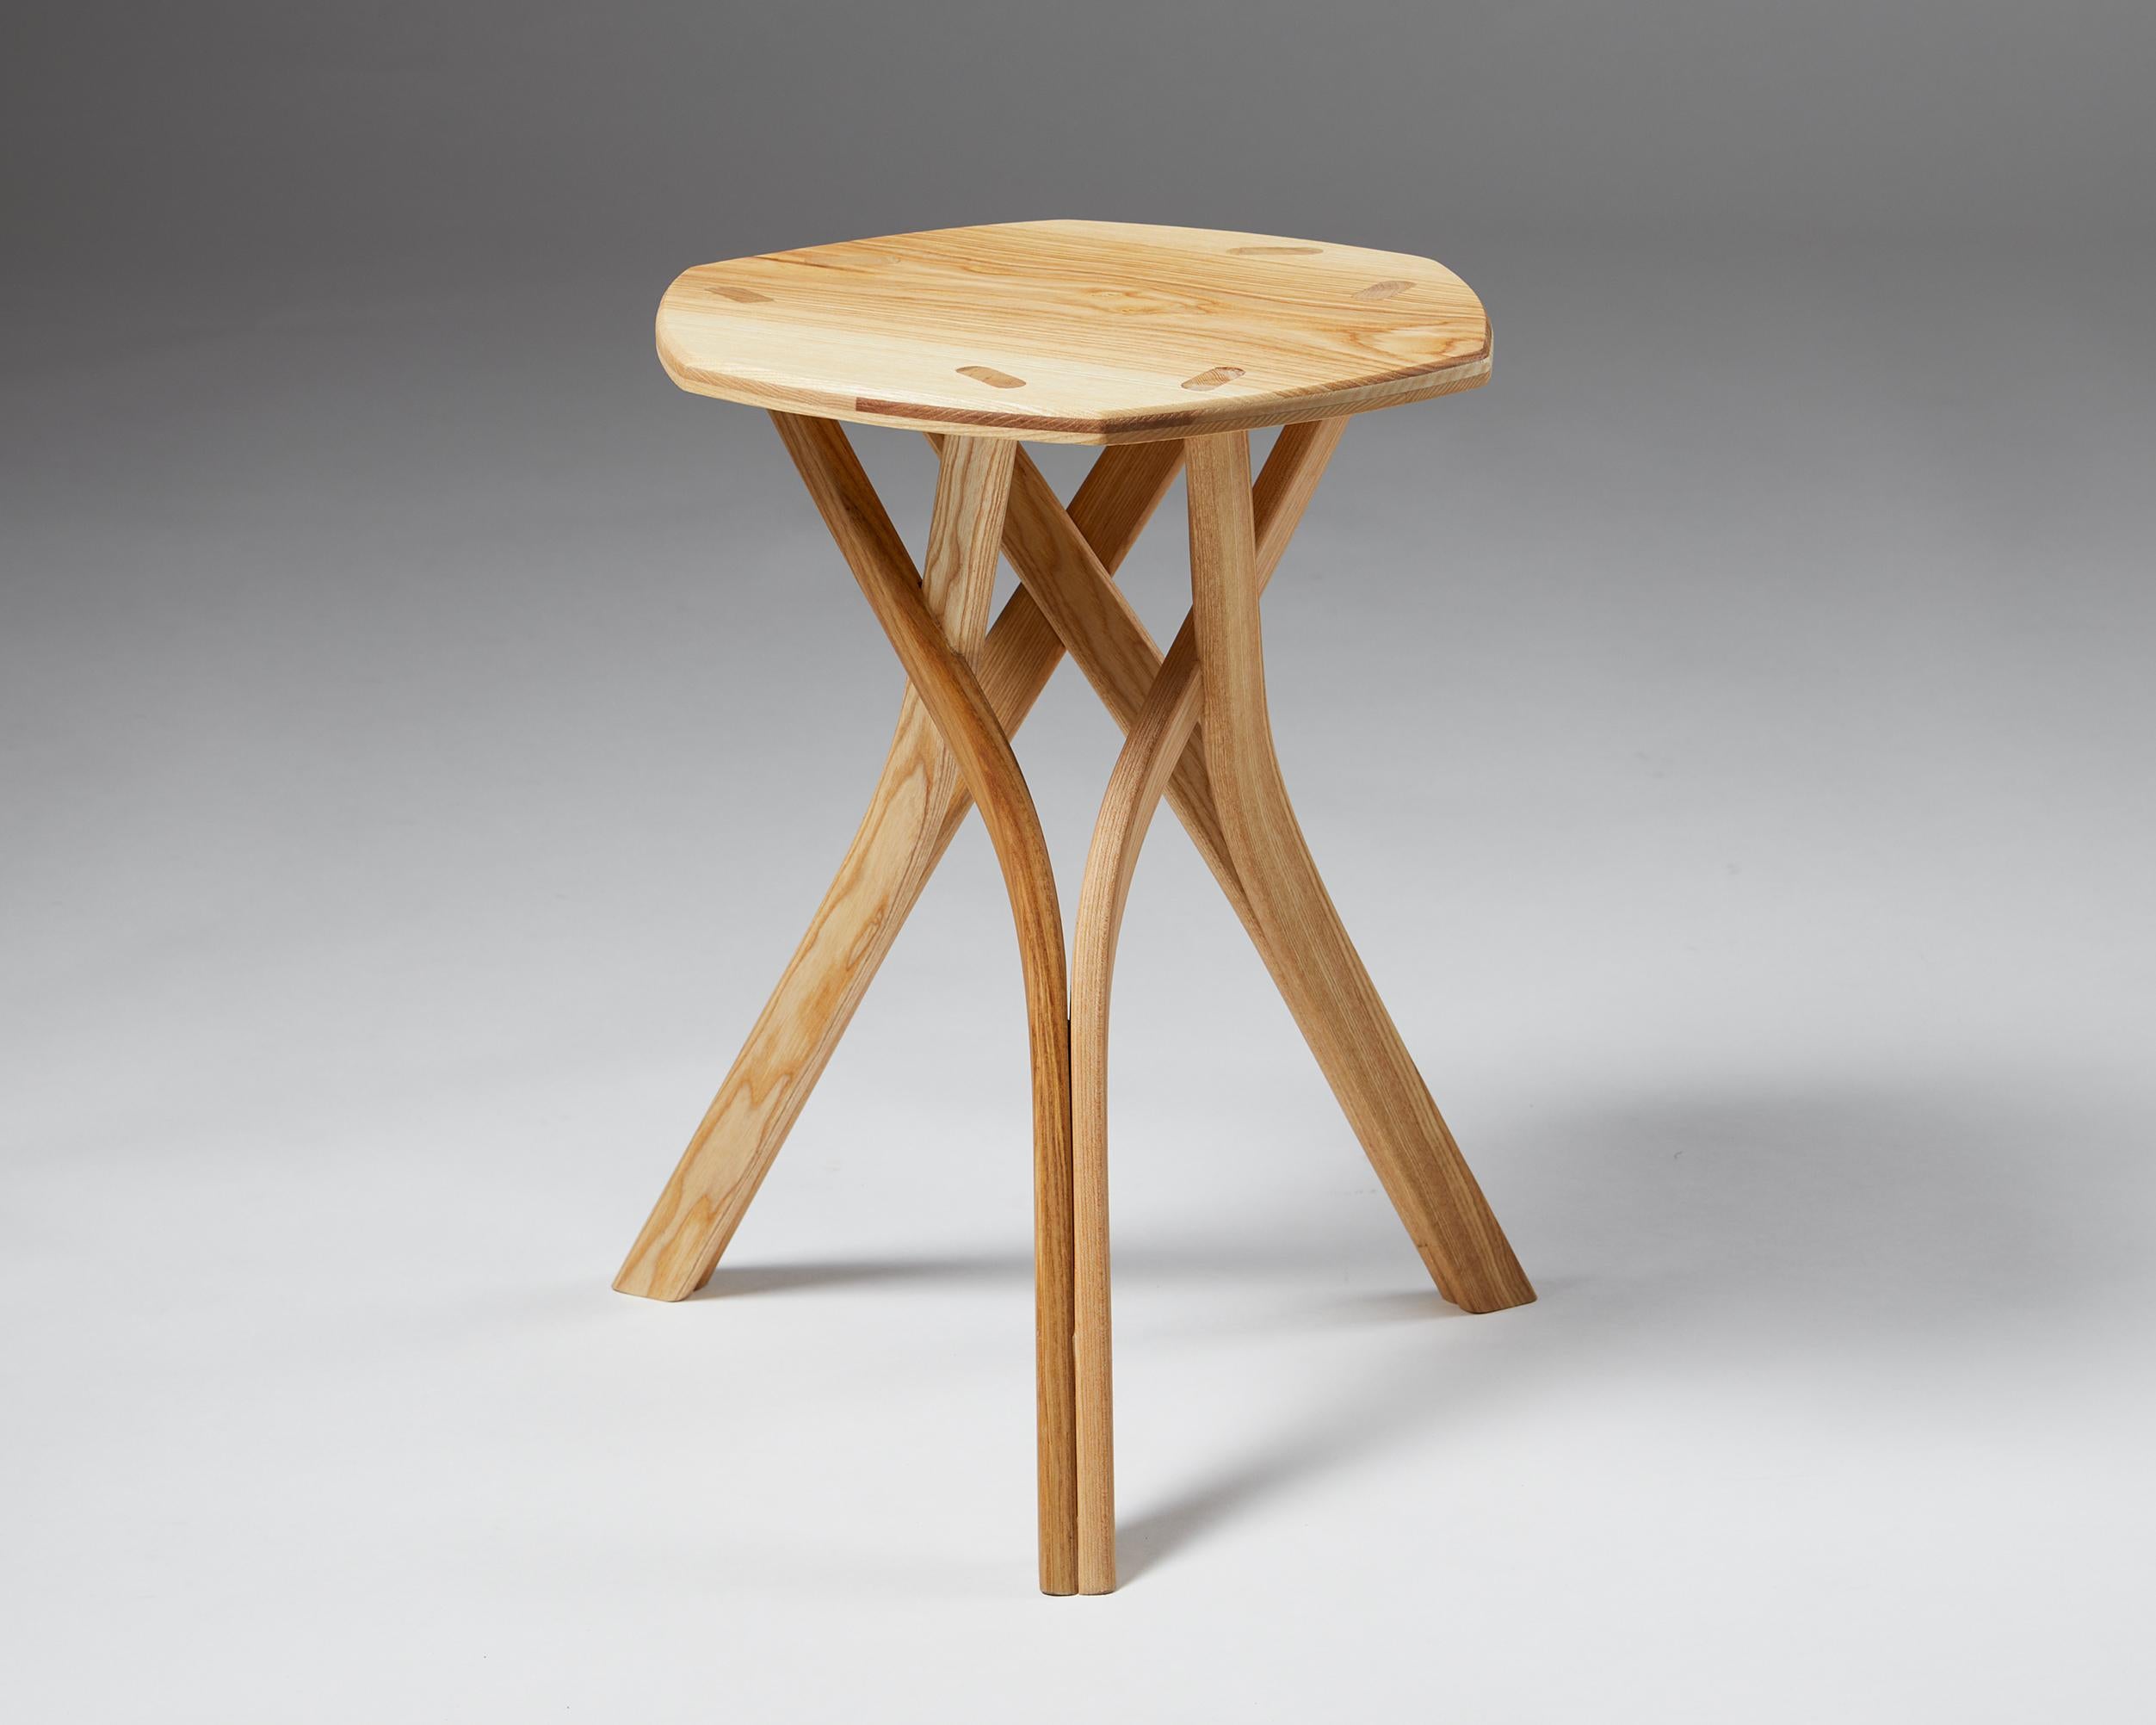 Stool designed by Calle Warfvinge,
Sweden. 

Contemporary.

Ash.

Unique.

Engraved ‘CW’.

This contemporary Swedish stool is a work of unparalleled craftsmanship. Calle Warfvinge carefully chose the individual wooden components to achieve a